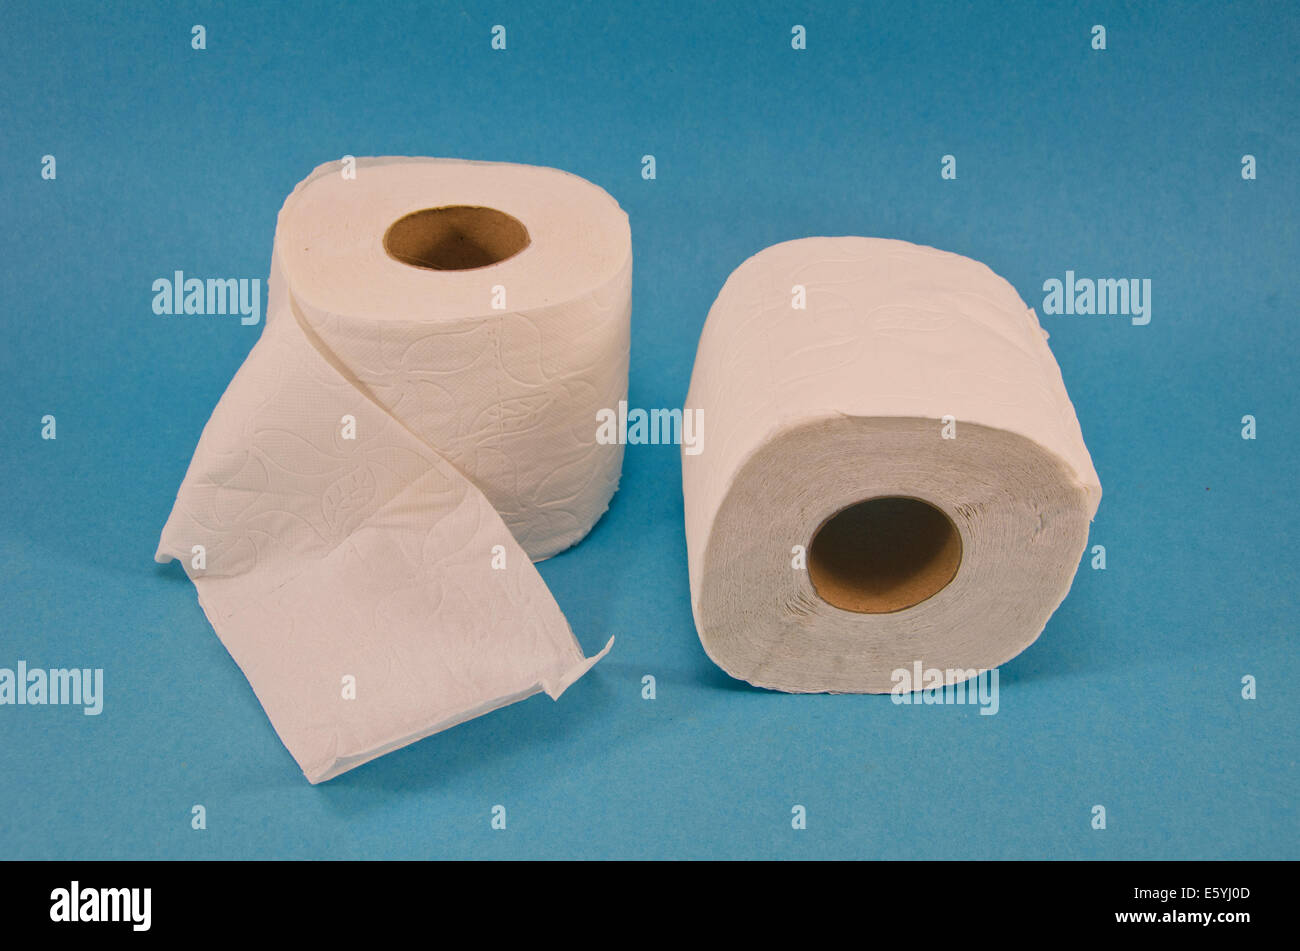 Soft Toilet Paper on blue background. Two white rolls Stock Photo